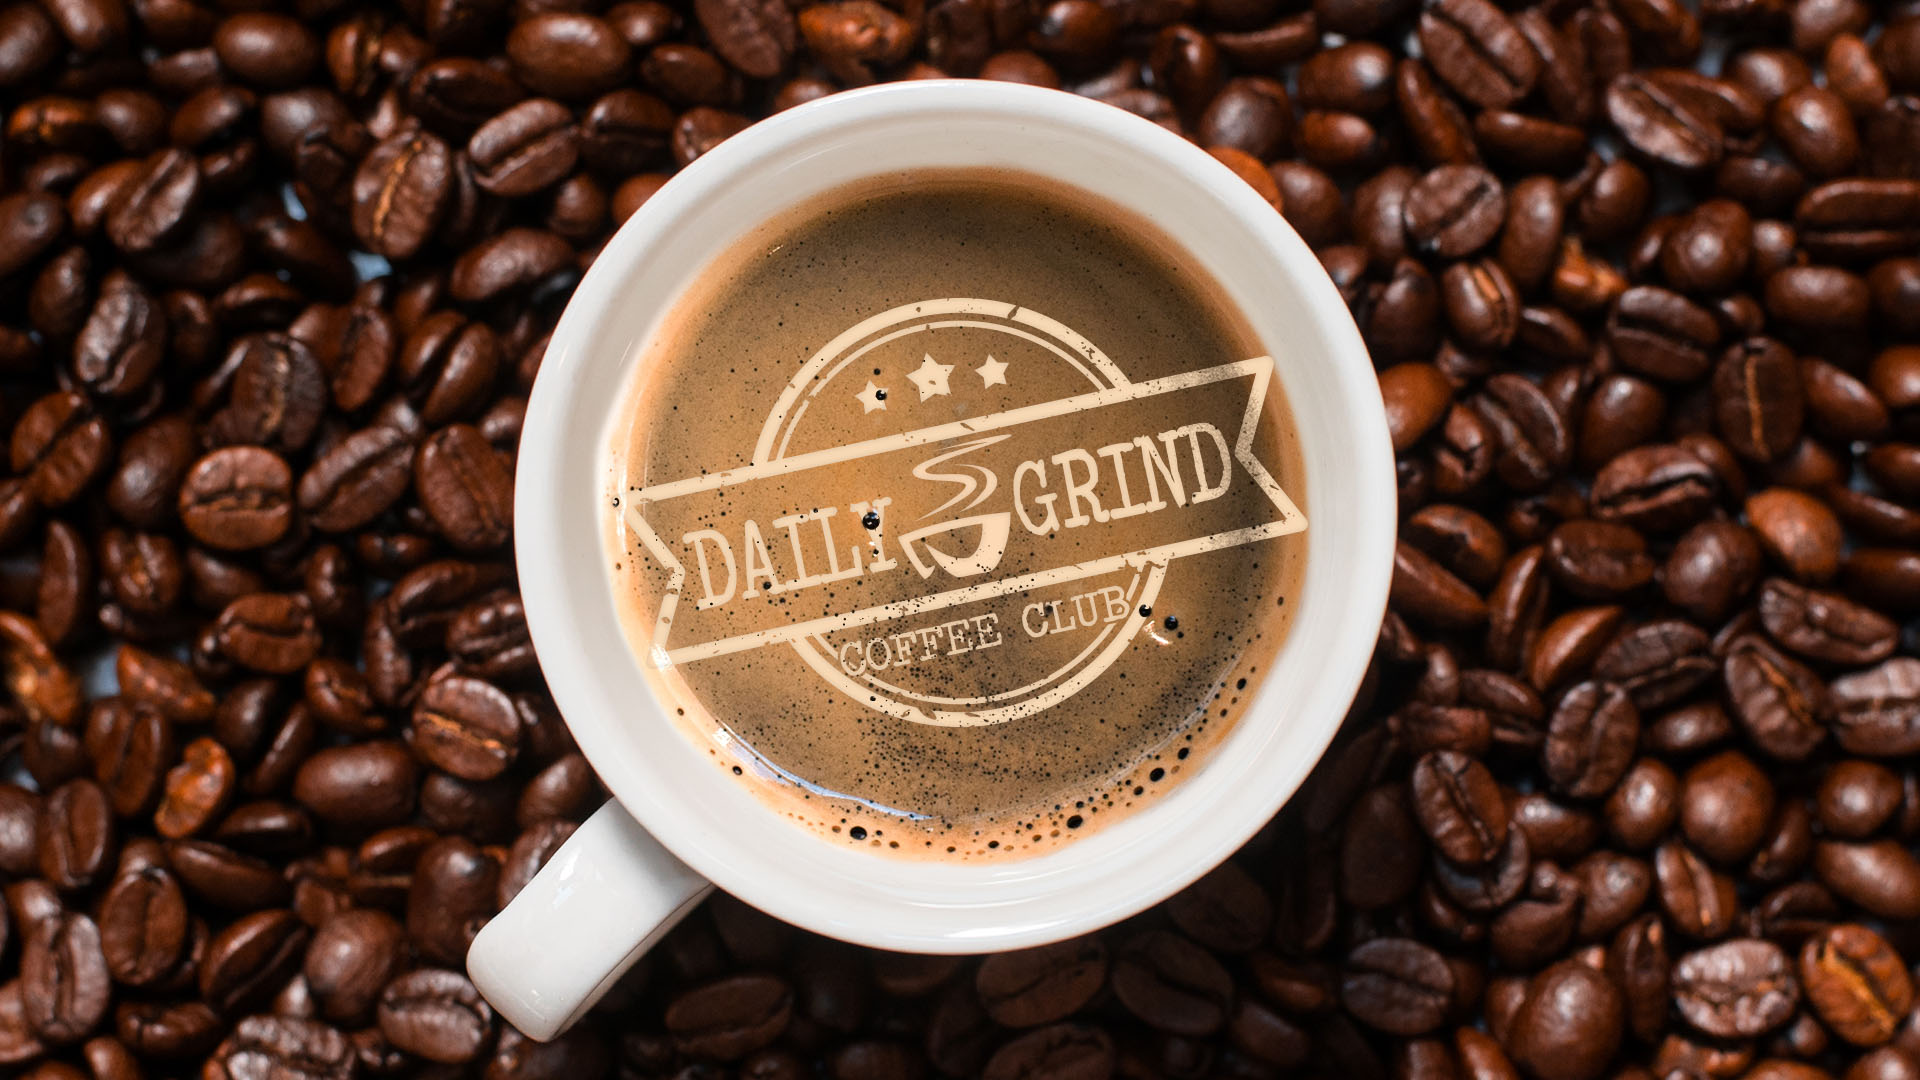 400-daily-grind-coffee-club-product-shot-wide-banner-16886656461471.jpg